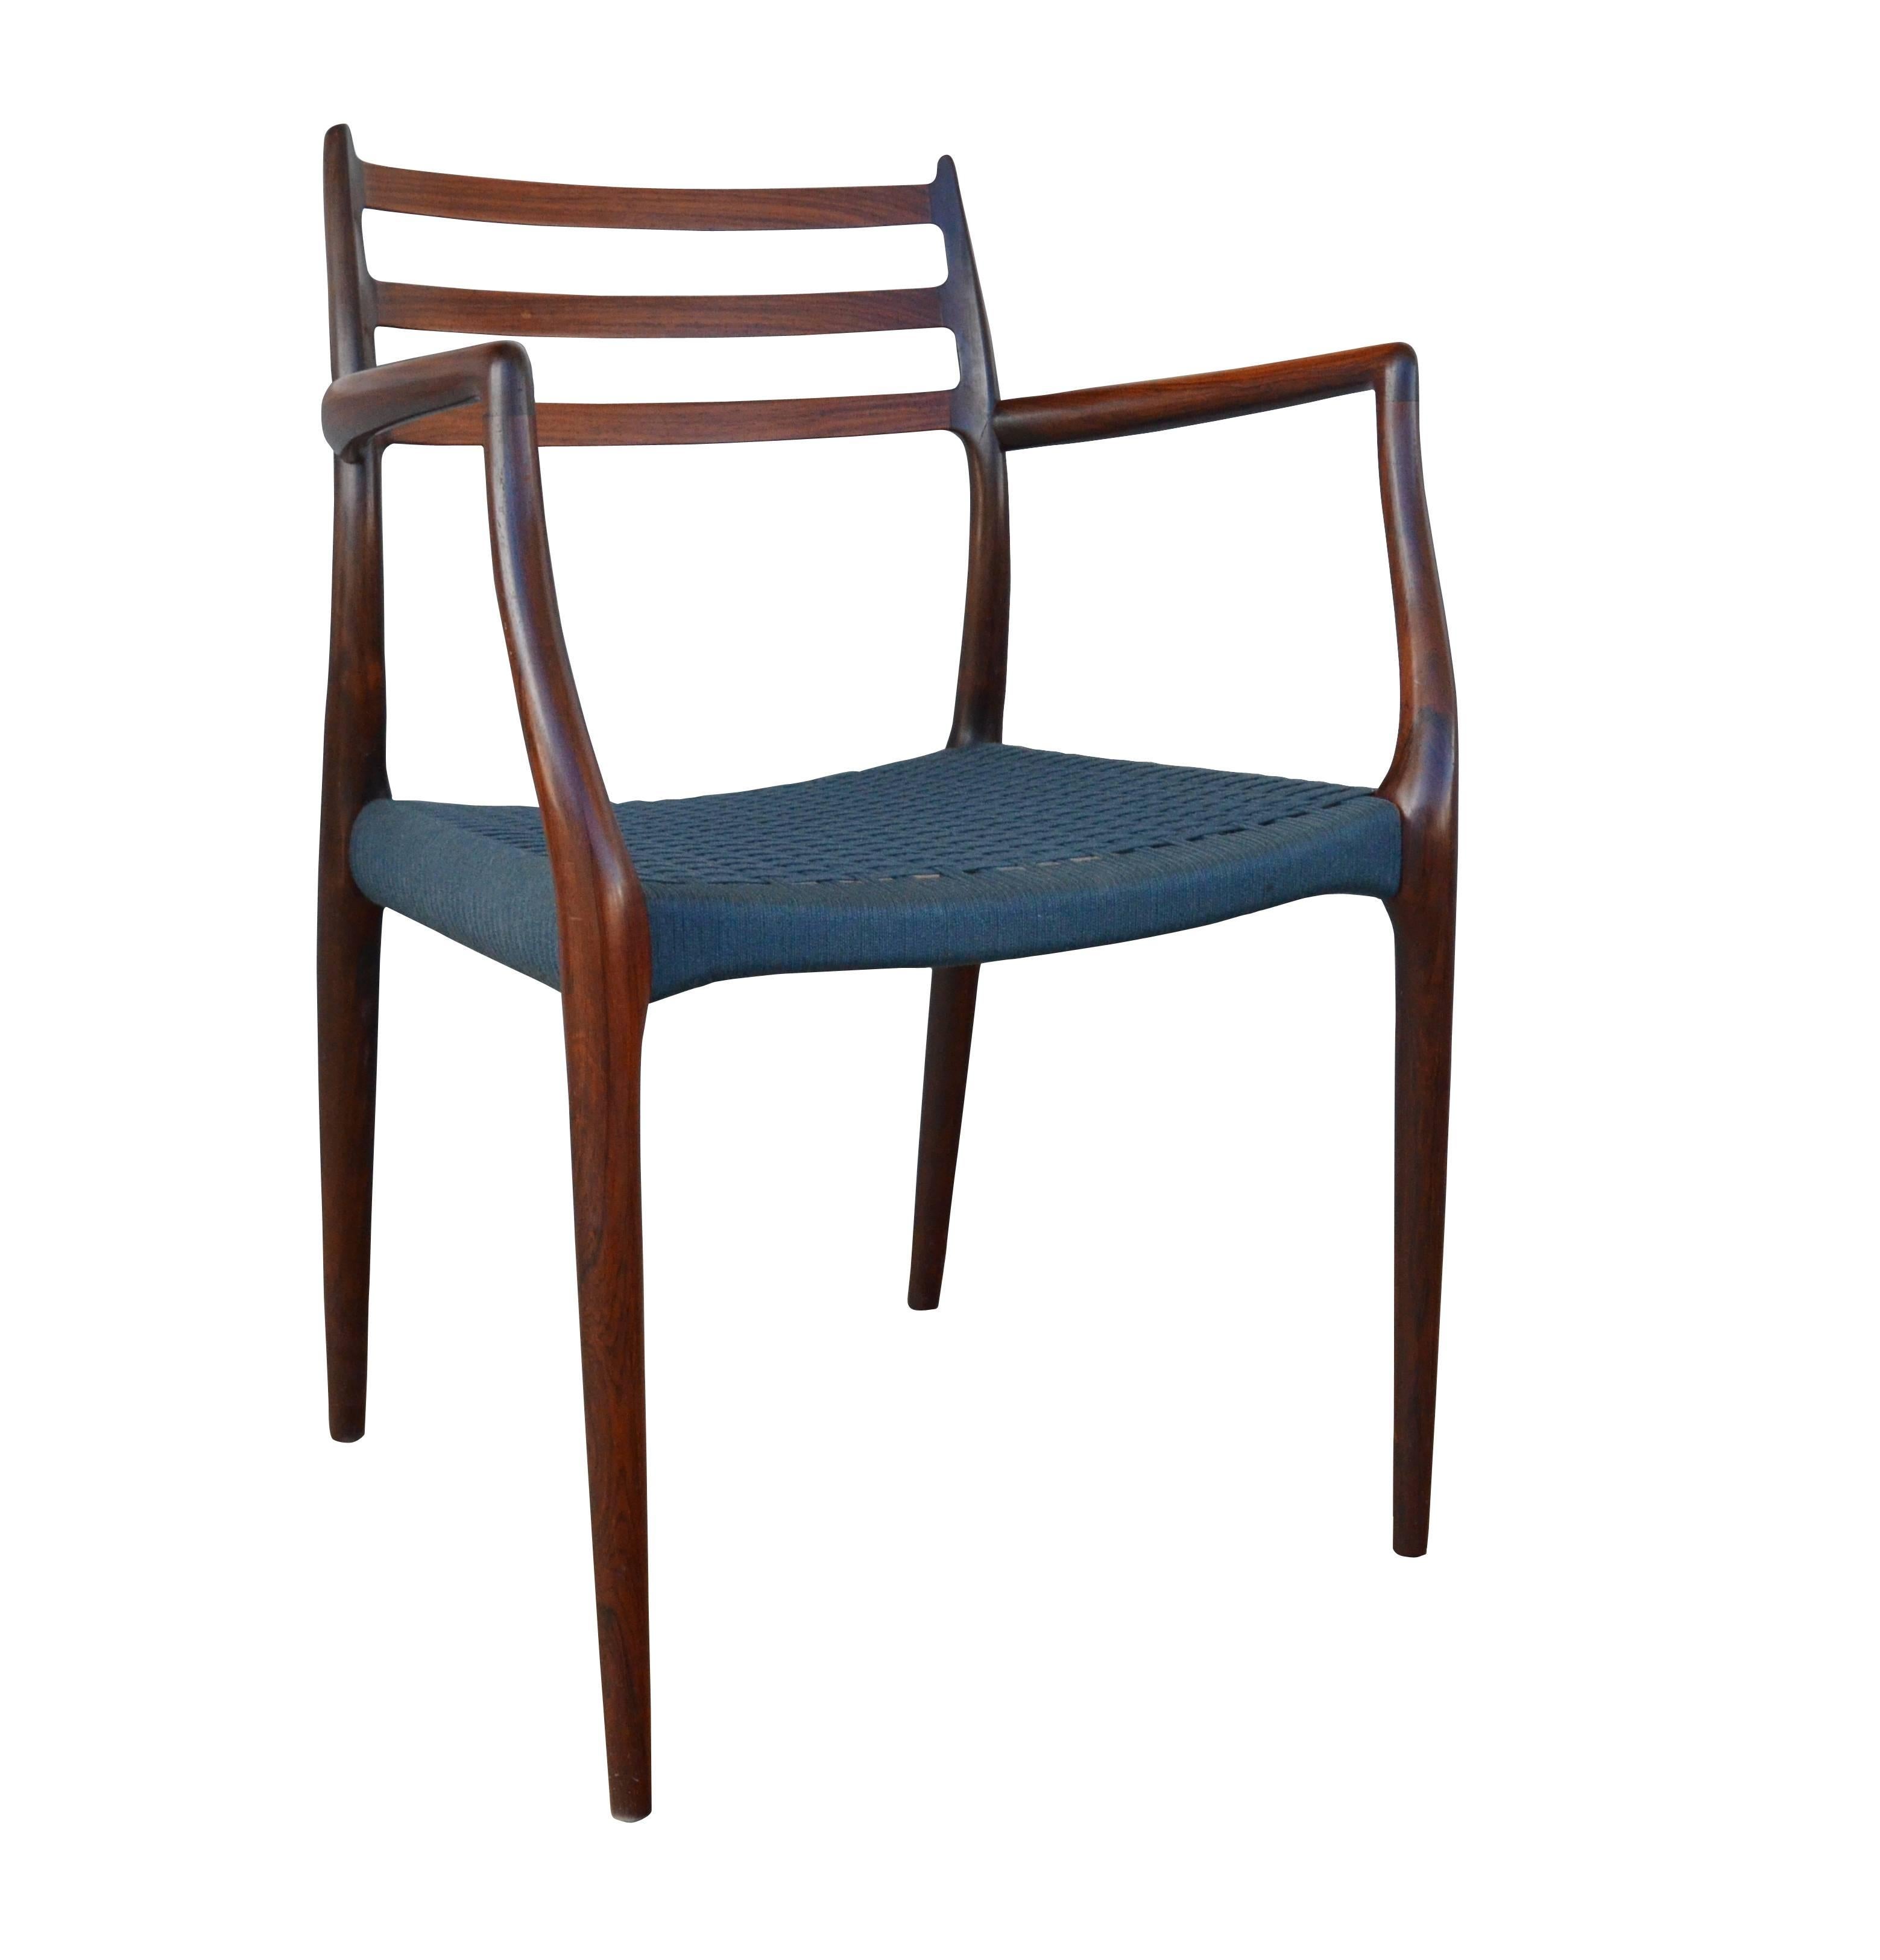 Mid-Century Modern Niels Otto Moller Rosewood Dining Chairs #62 and #78 with Original Cord Seats